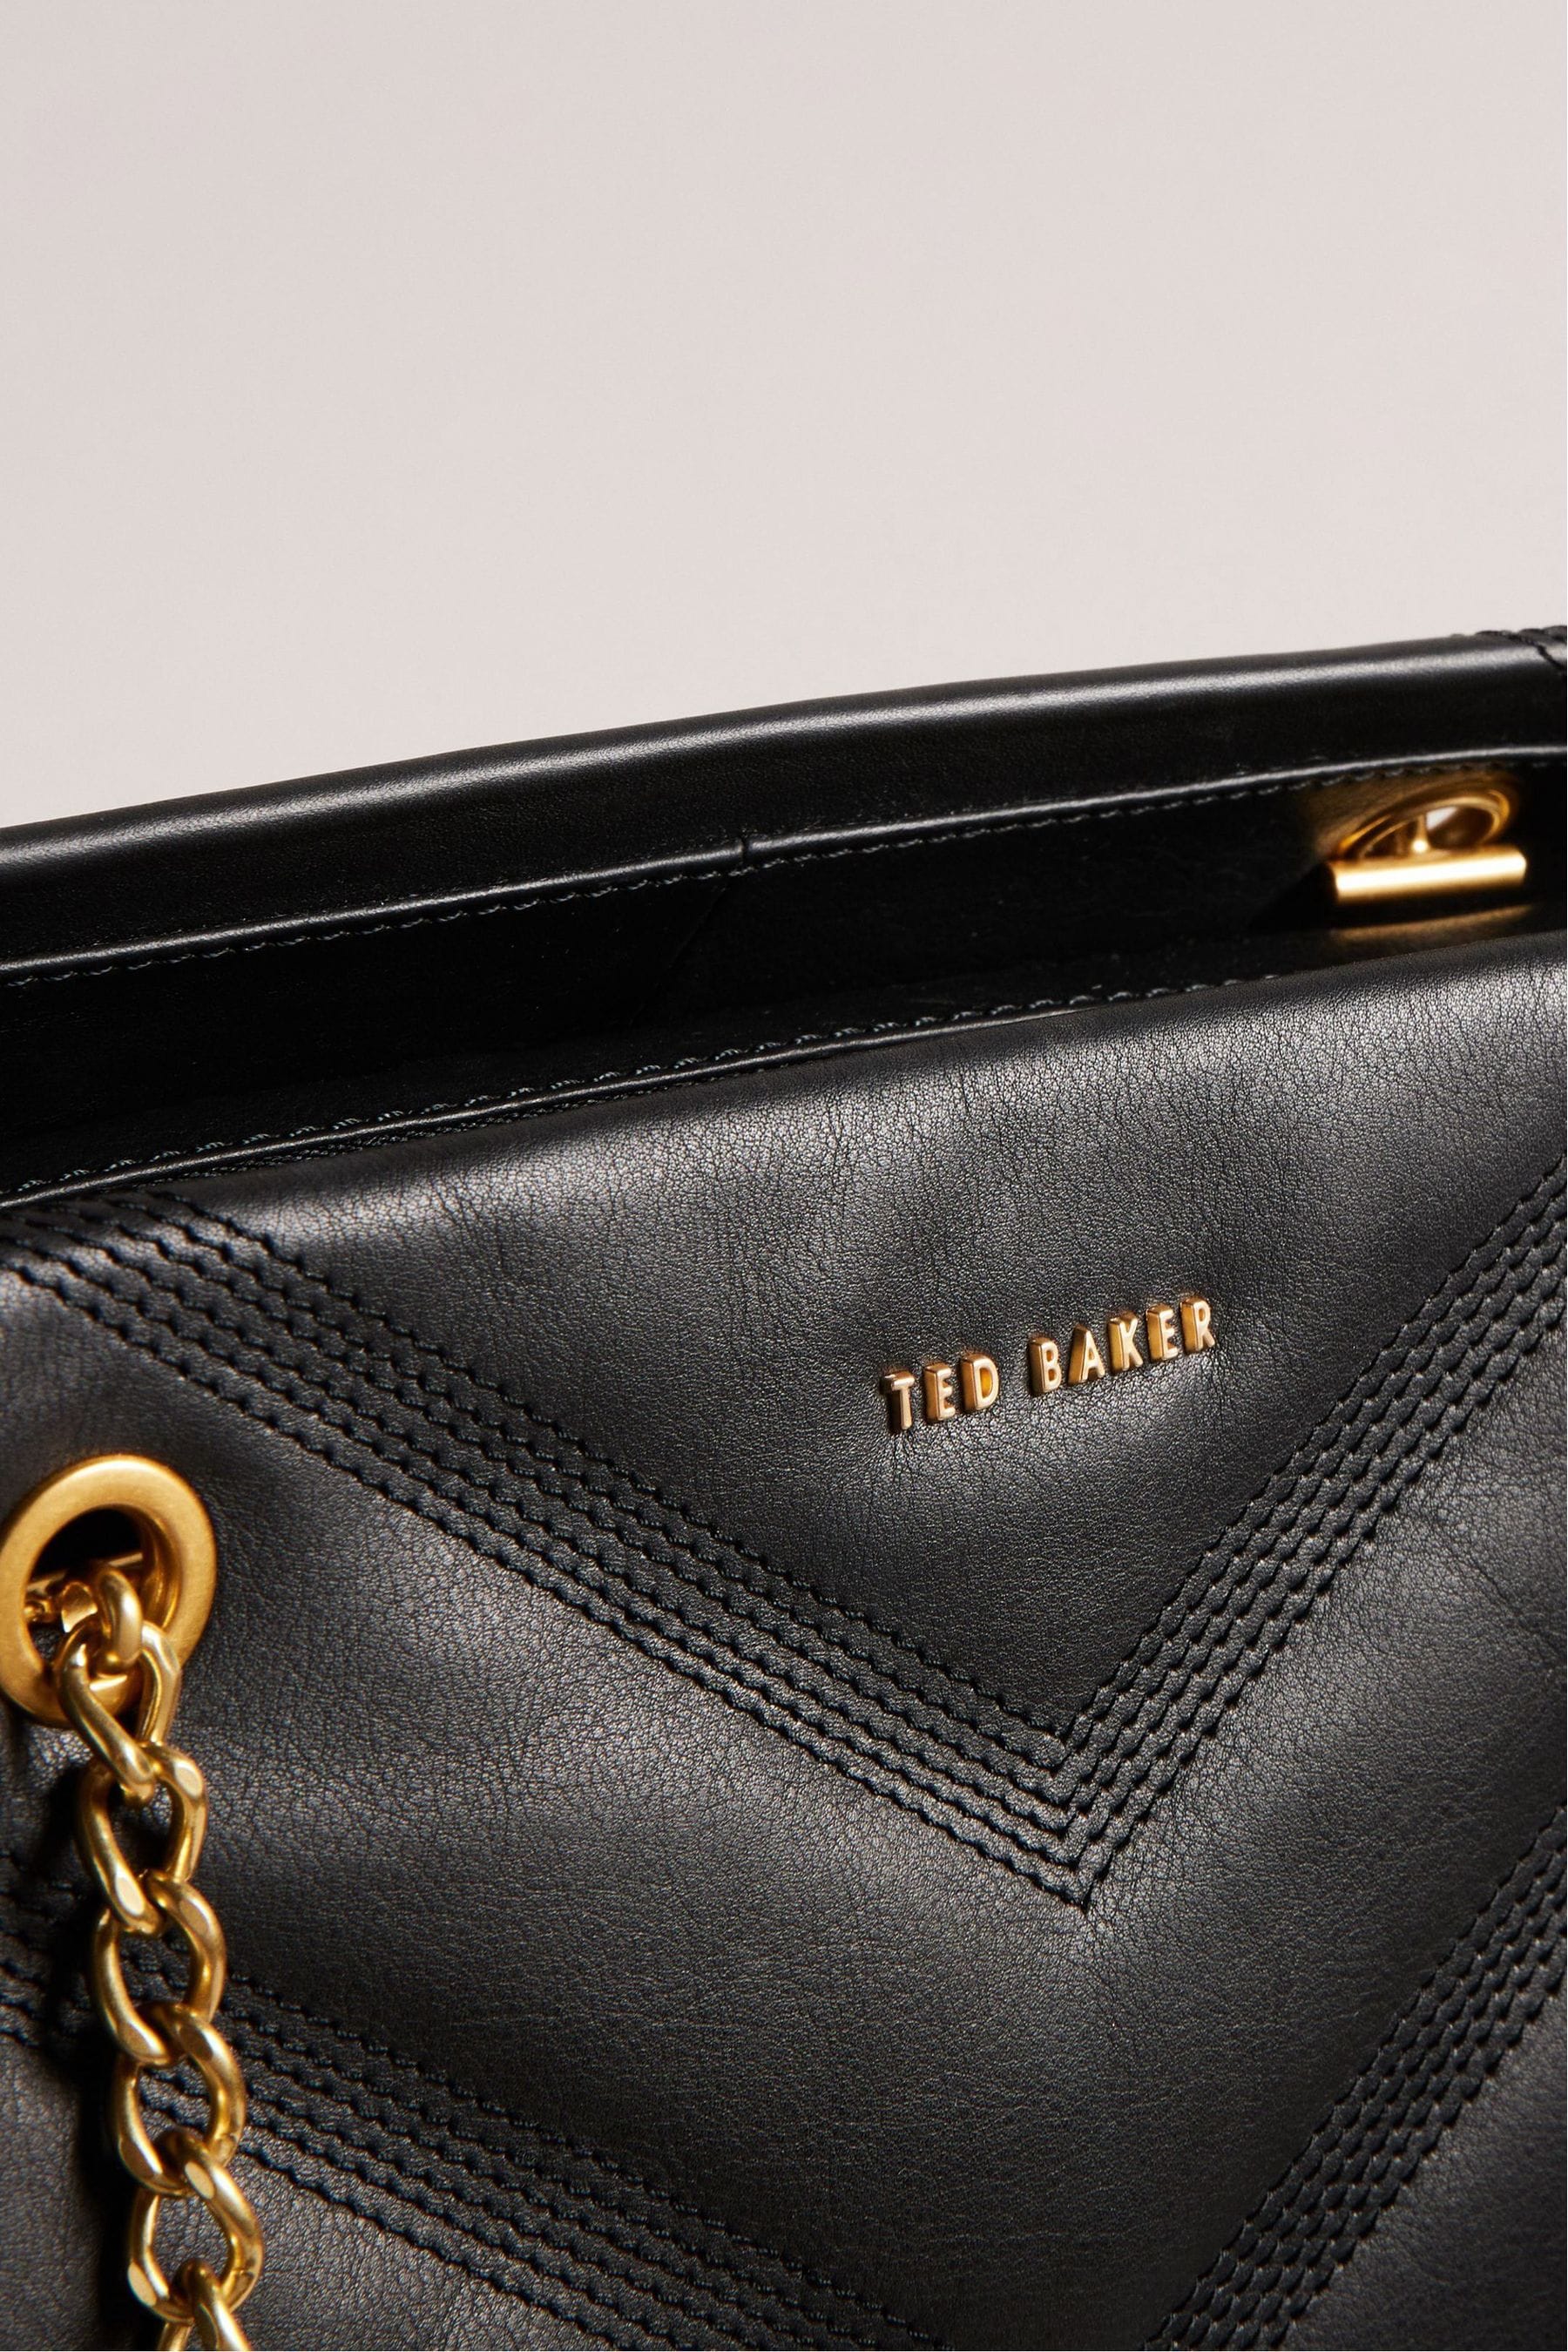 Buy Ted Baker Black Puffer Ayalia Tote Bag from the Next UK online shop